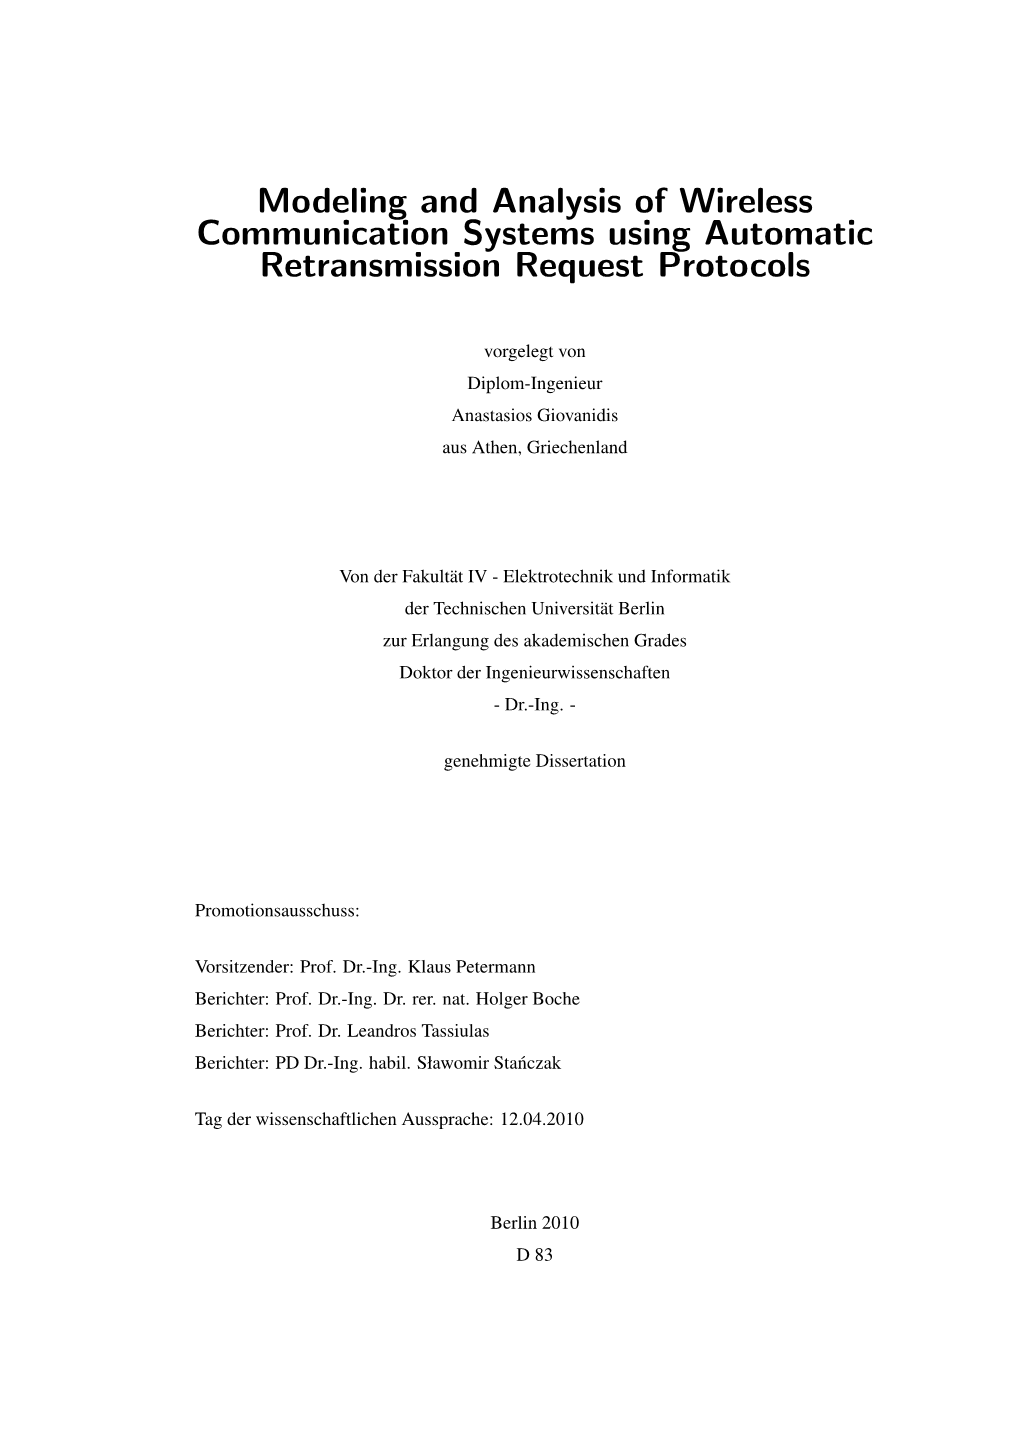 Modeling and Analysis of Wireless Communication Systems Using Automatic Retransmission Request Protocols